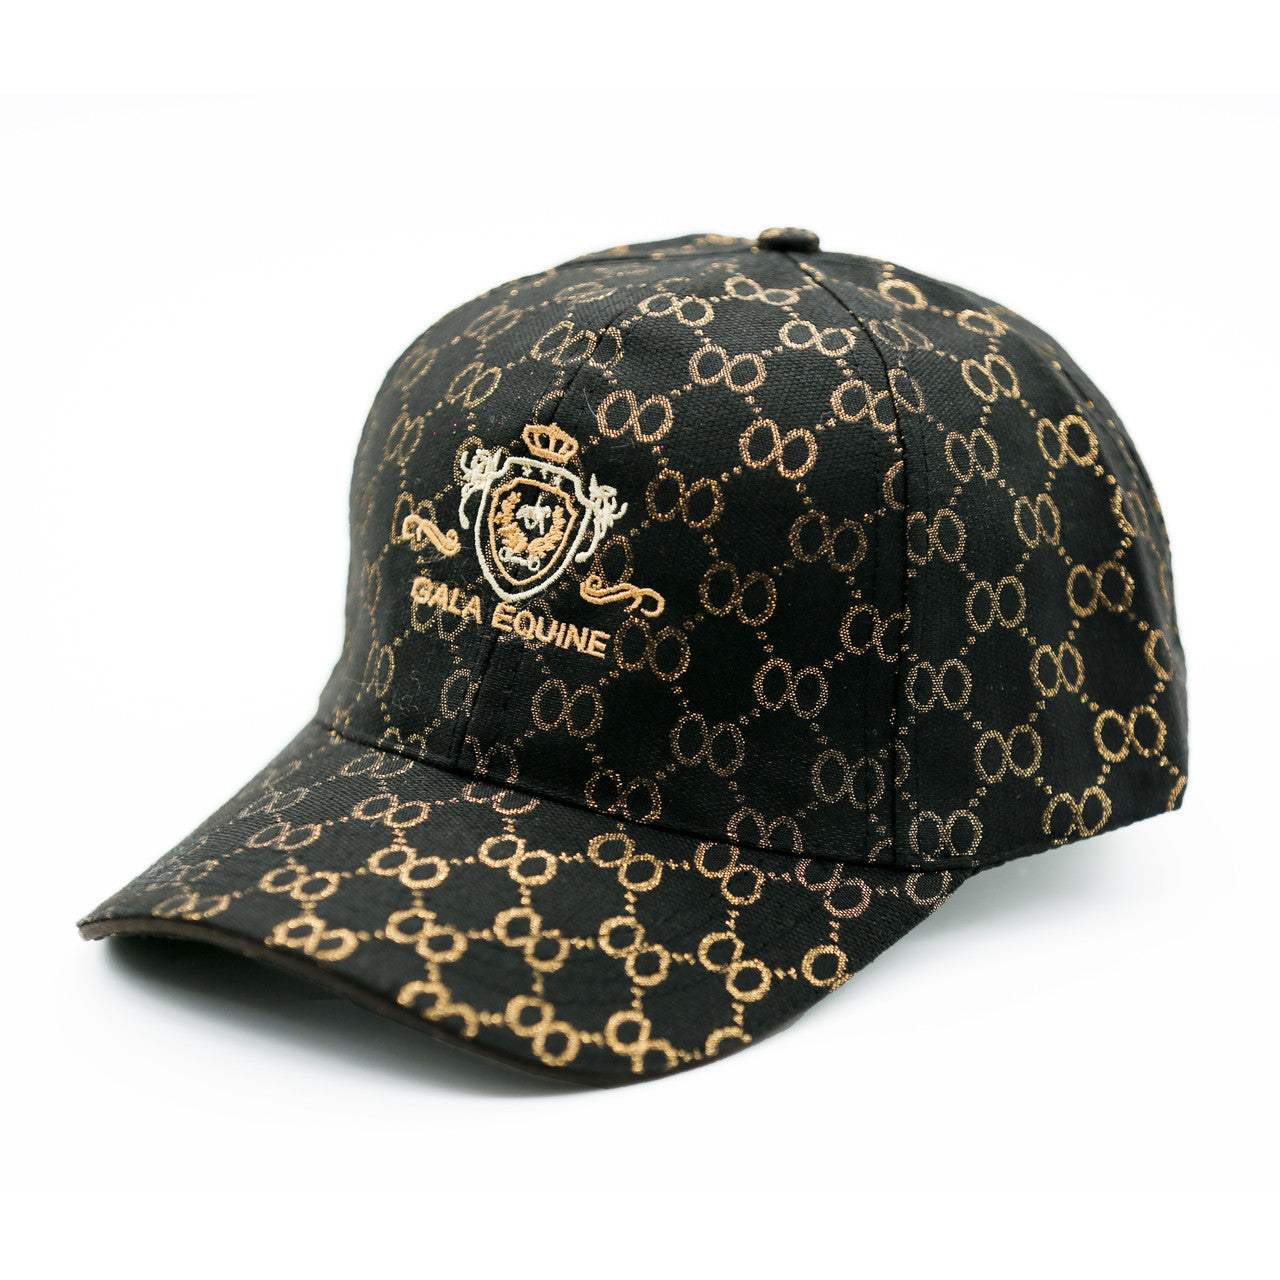 Cap - Black with Gold Chain